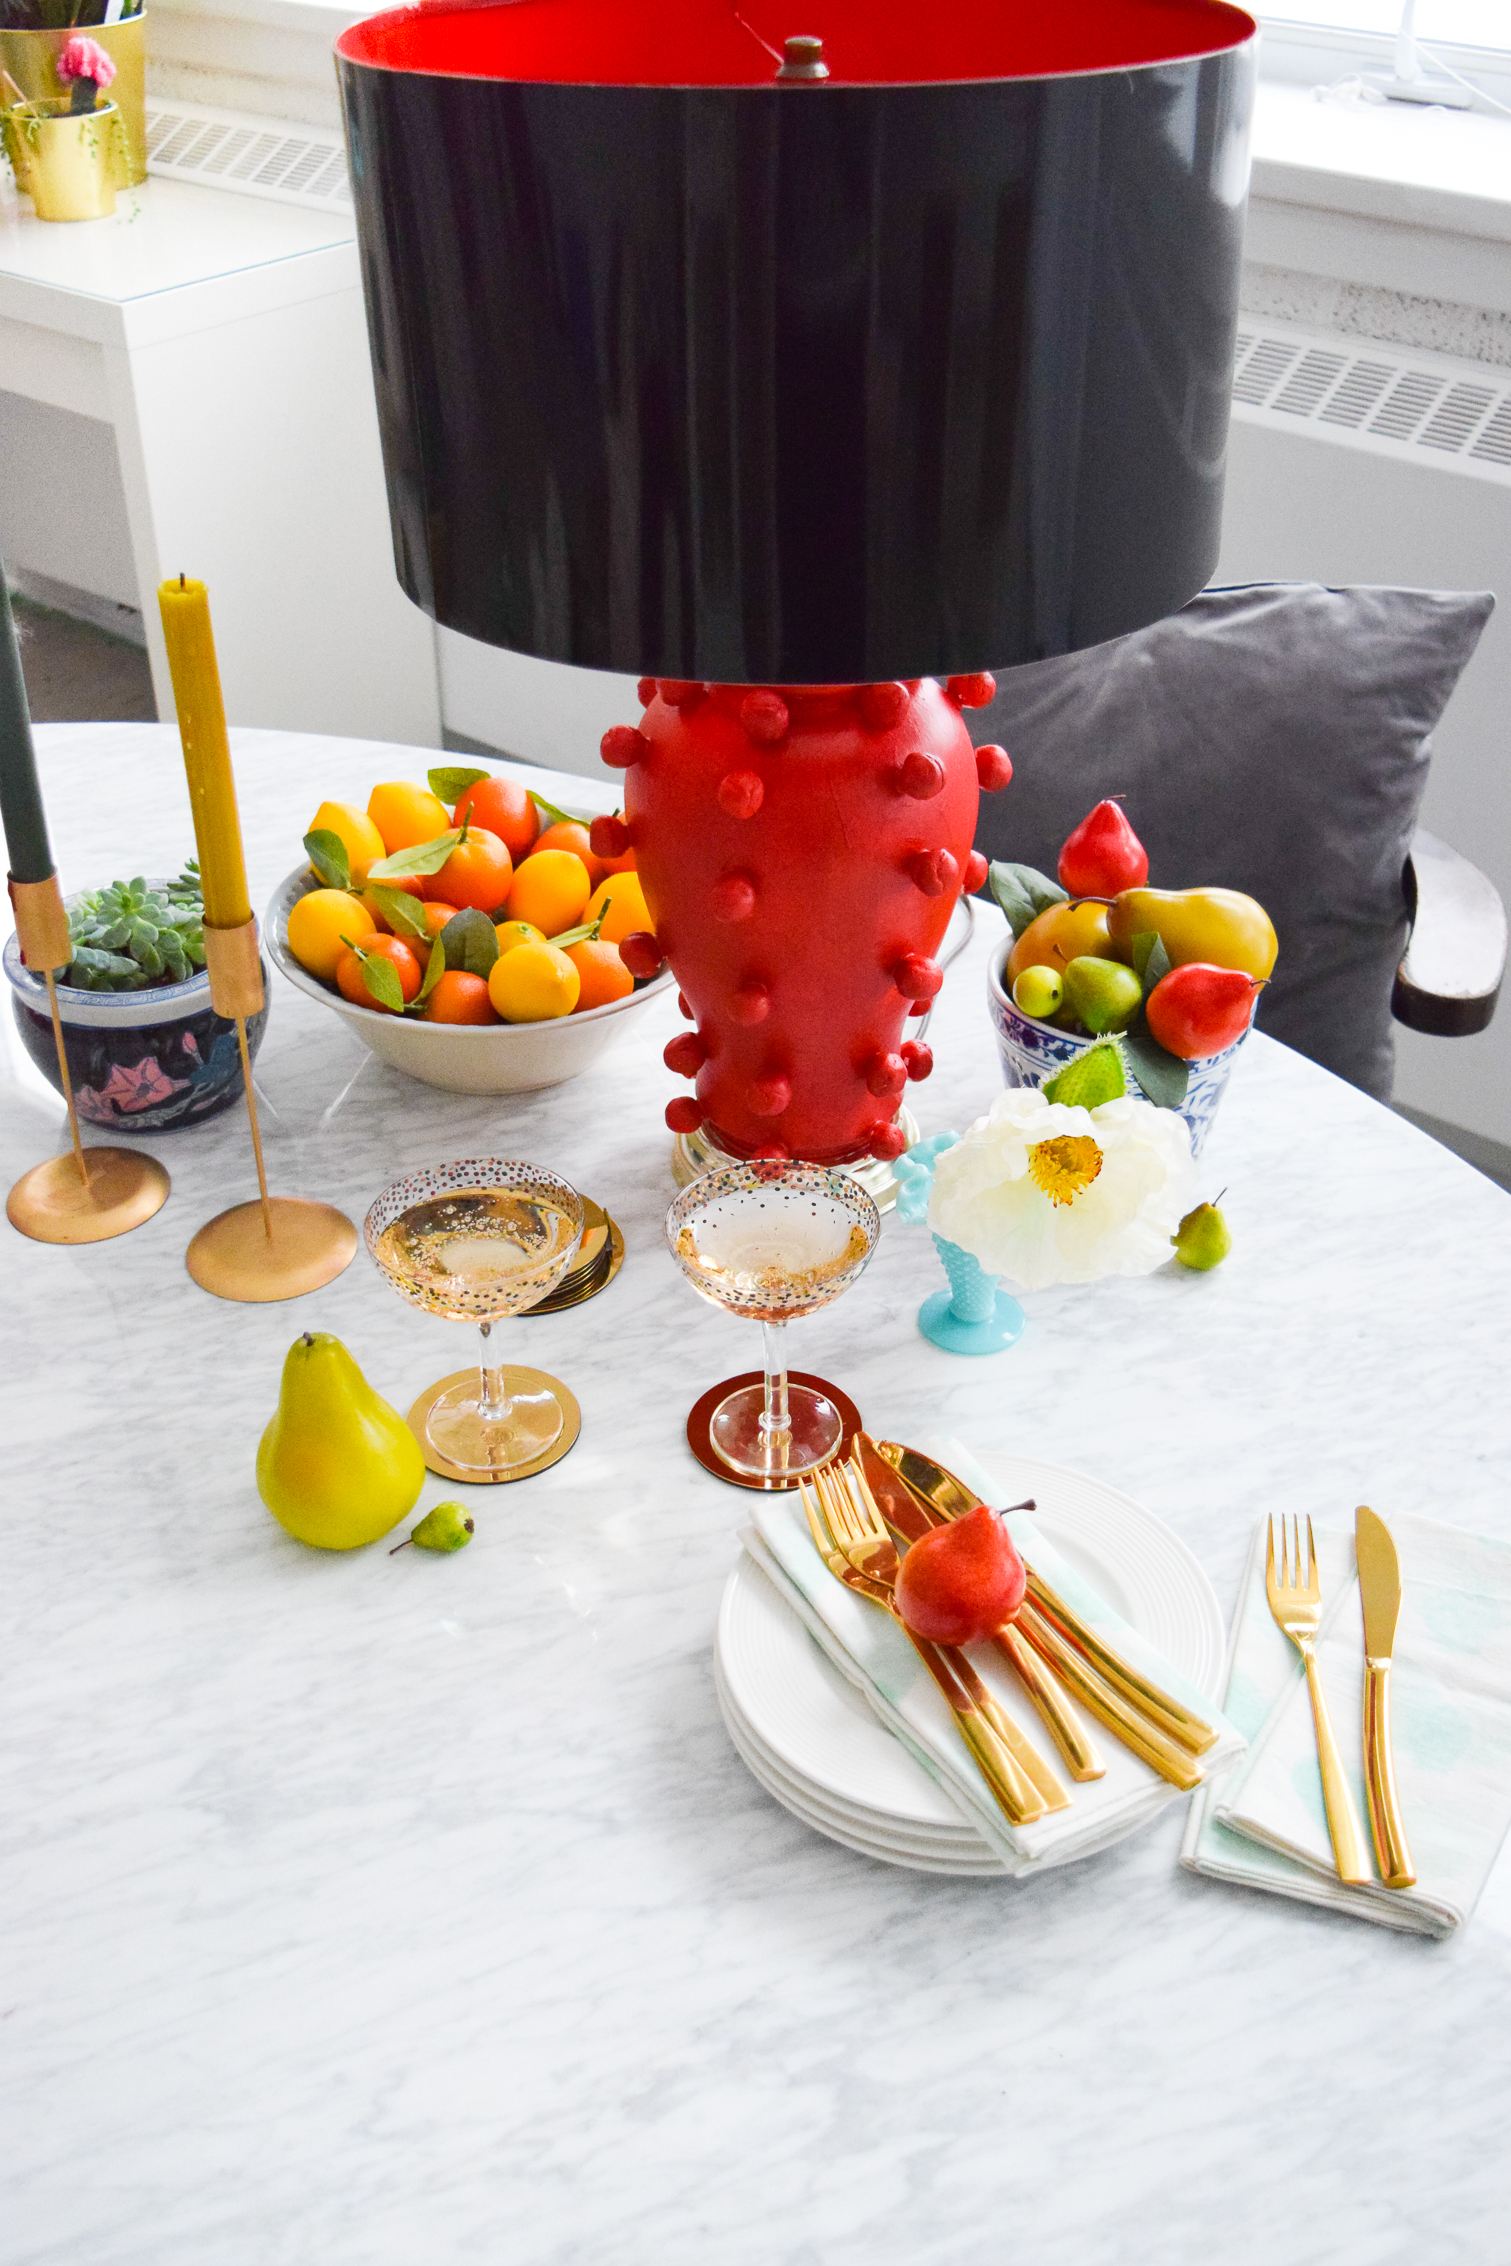 Bring some drama to your lighting situation with this DIY Kelly Wearstler Lamp. Upcycle an old lamp with air dry clay, and make one to amp up your decor. You can make it in any colour you want as long you've got the paint!